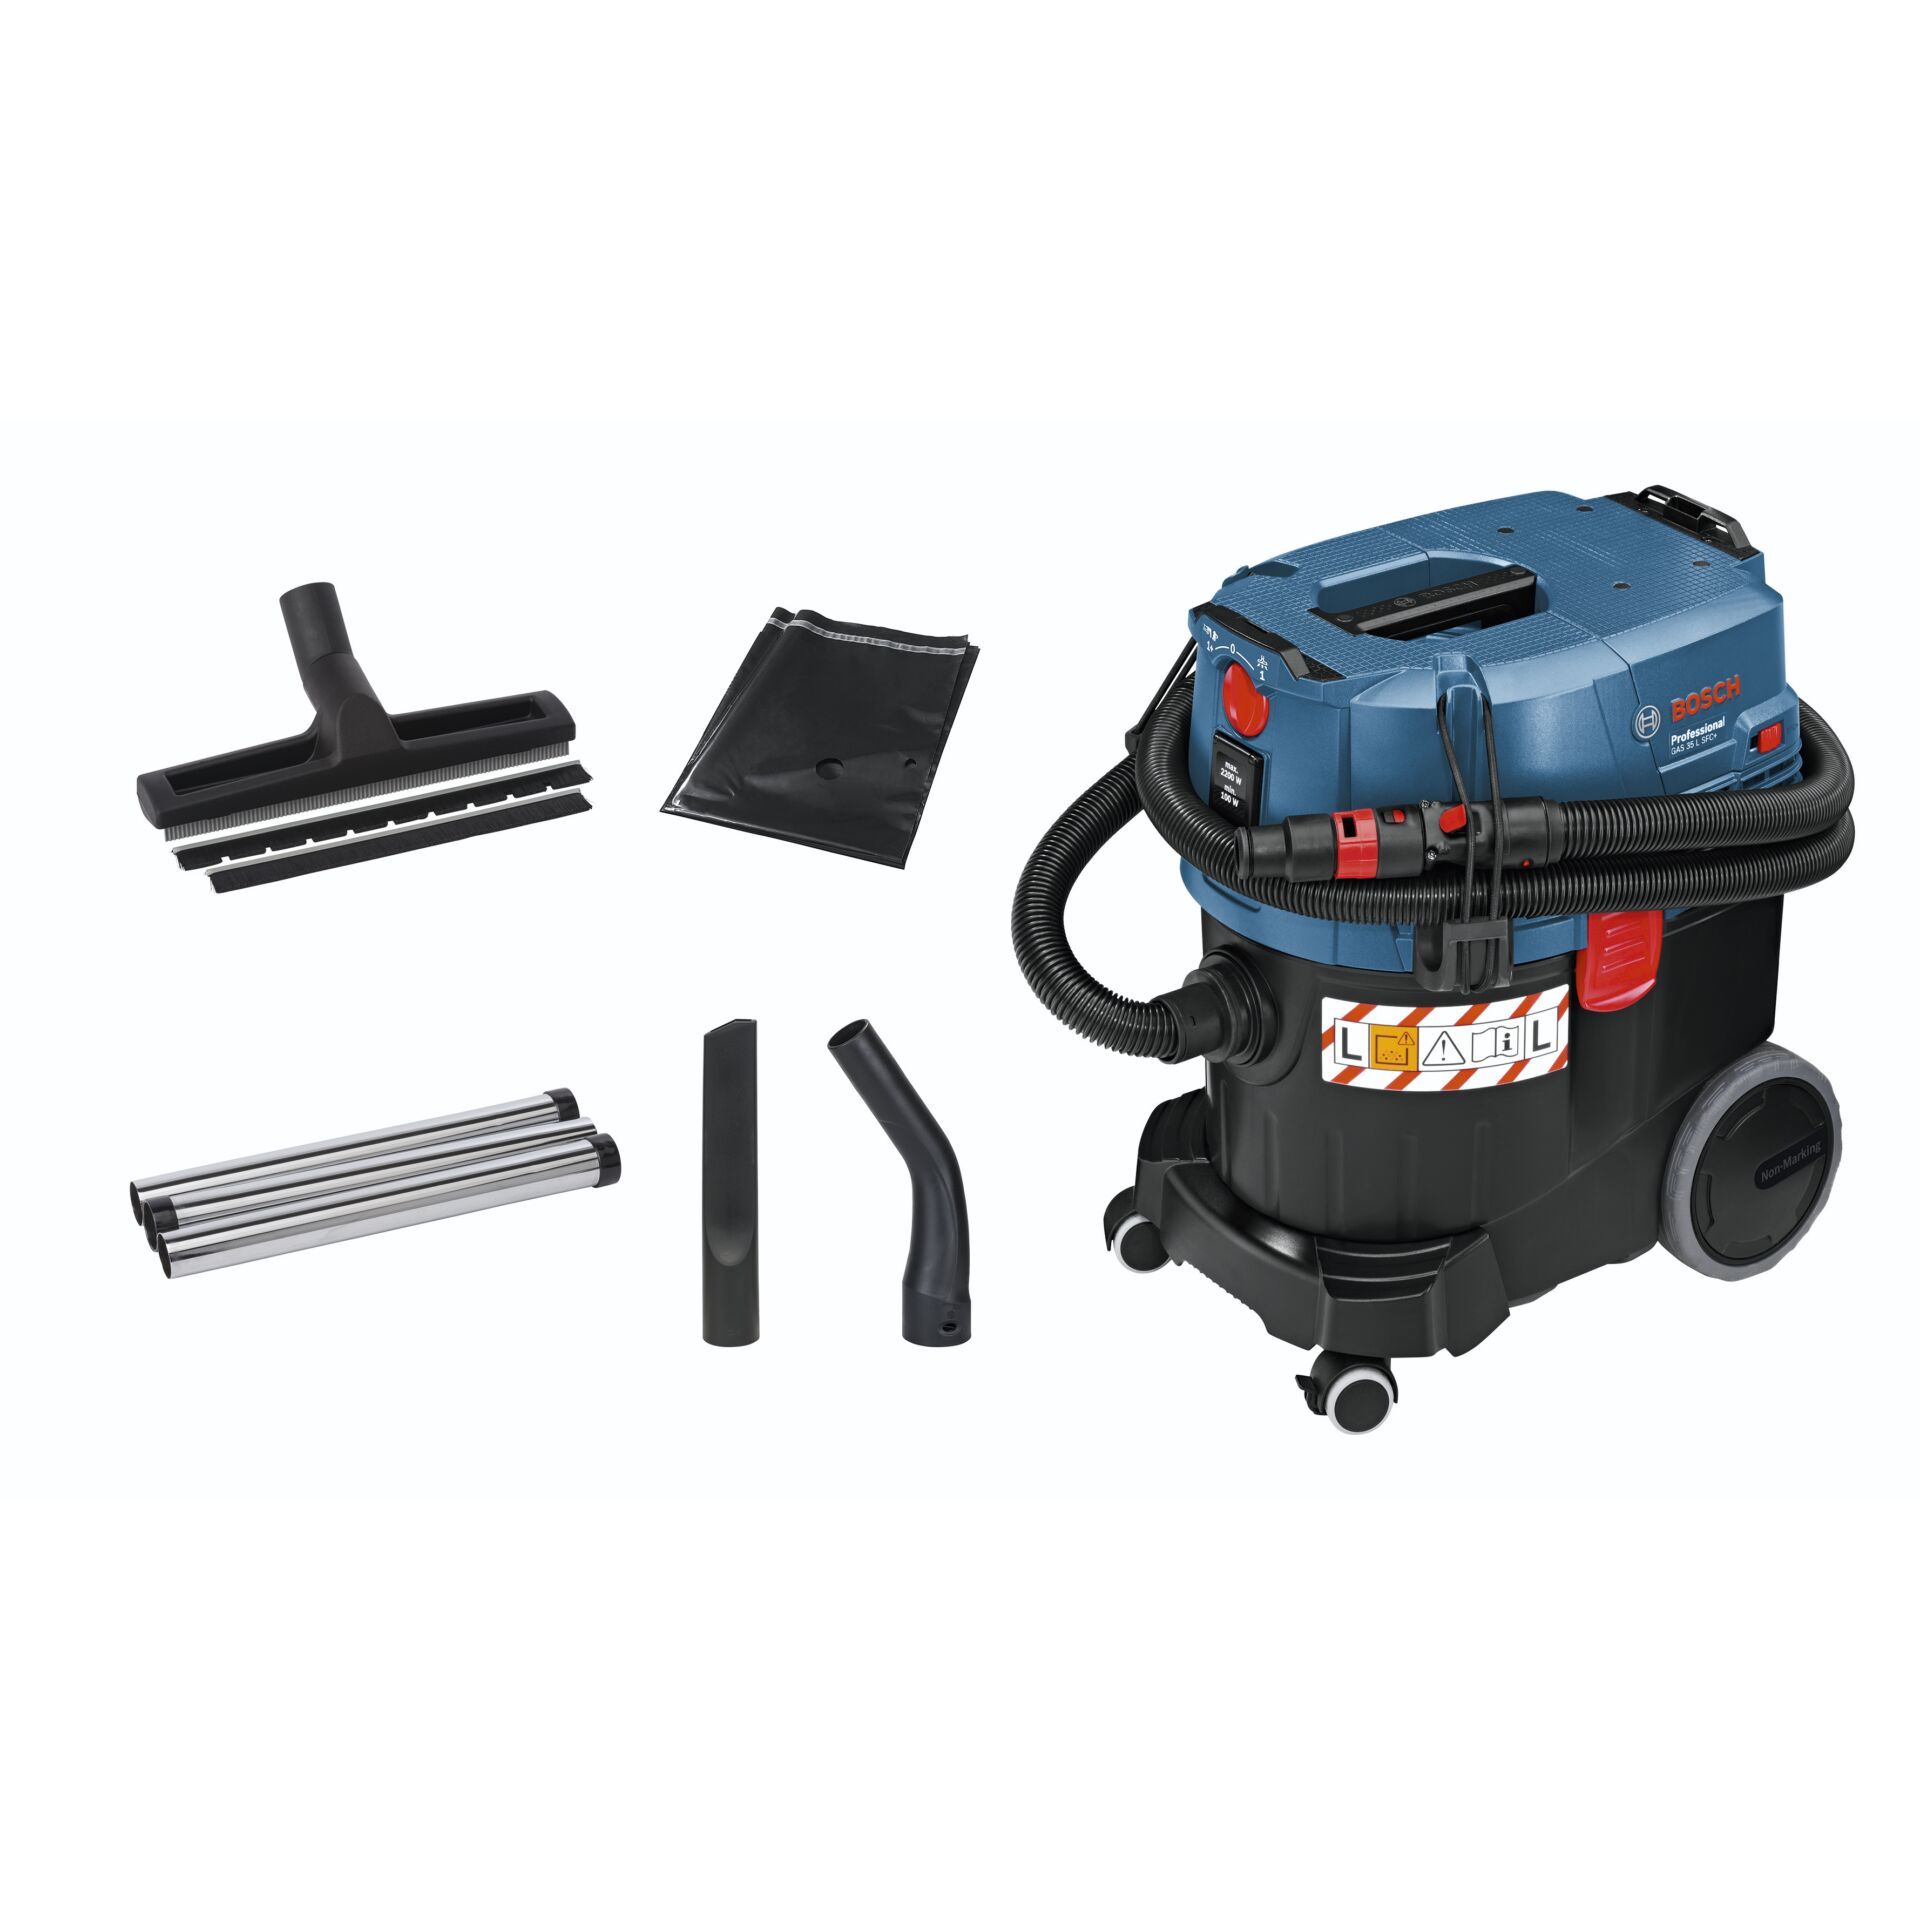 Bosch GAS 35 L SFC Wet/Dry Dust Extractor